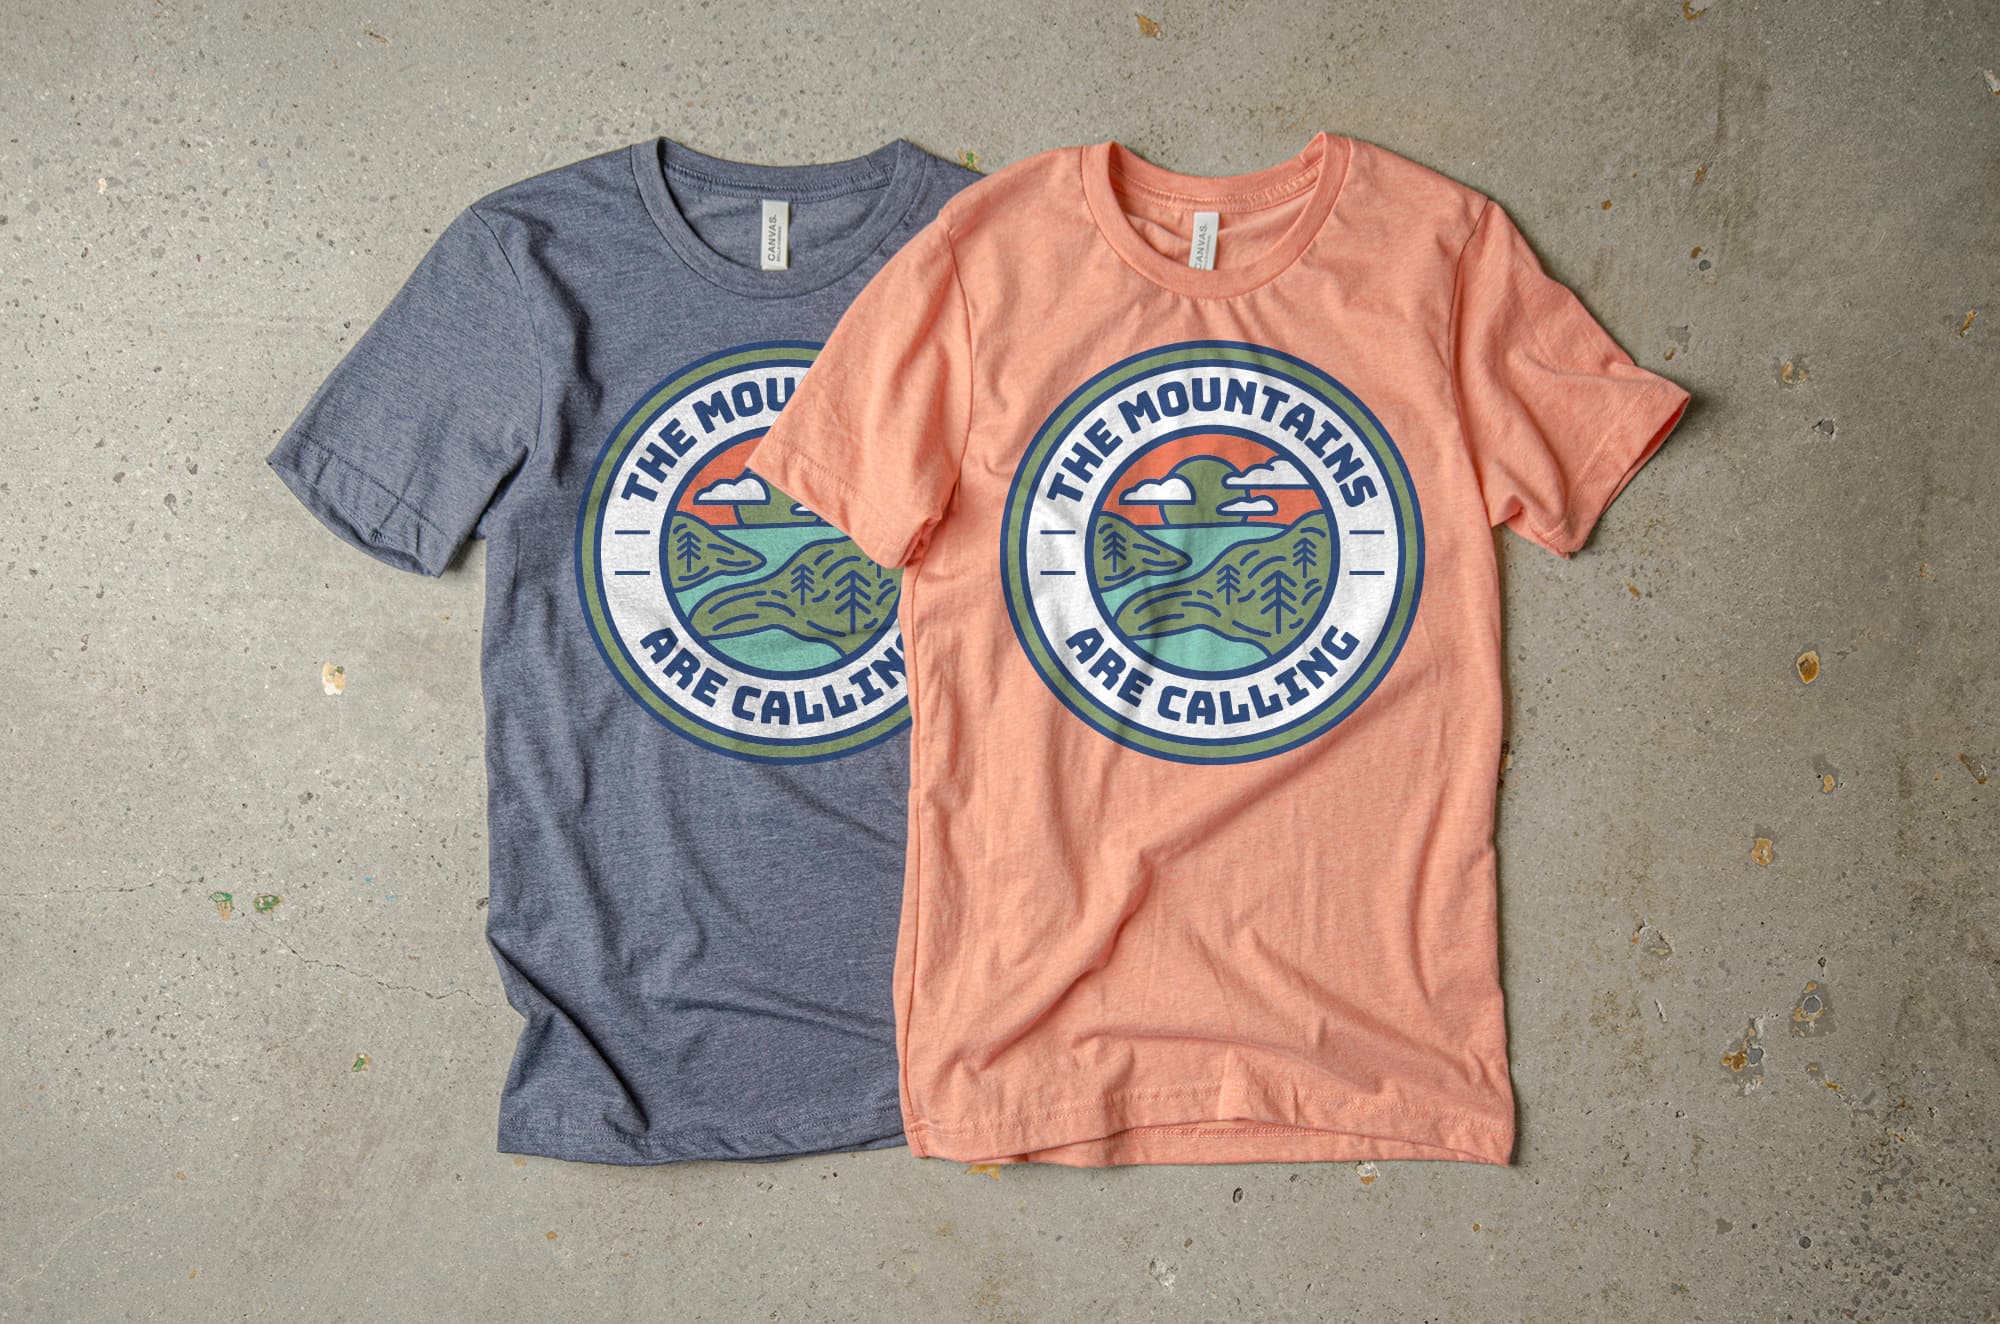 Two variations on the same t-shirt design using the riverside color pallet.